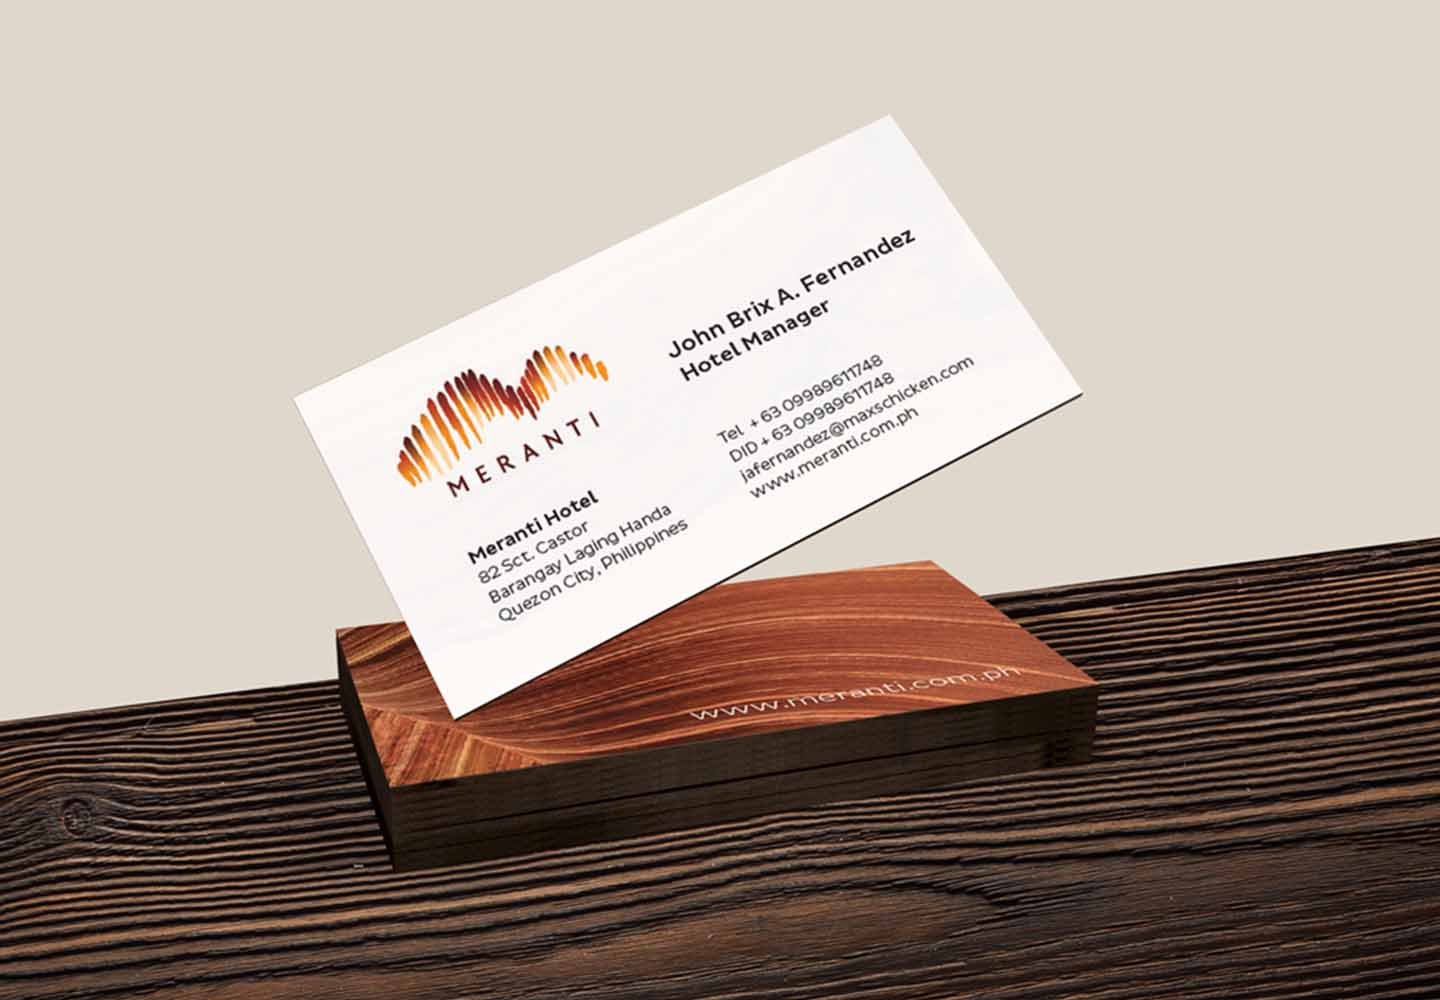 Brand Consultancy in Hospitality Industry. Business Card for Meranti.